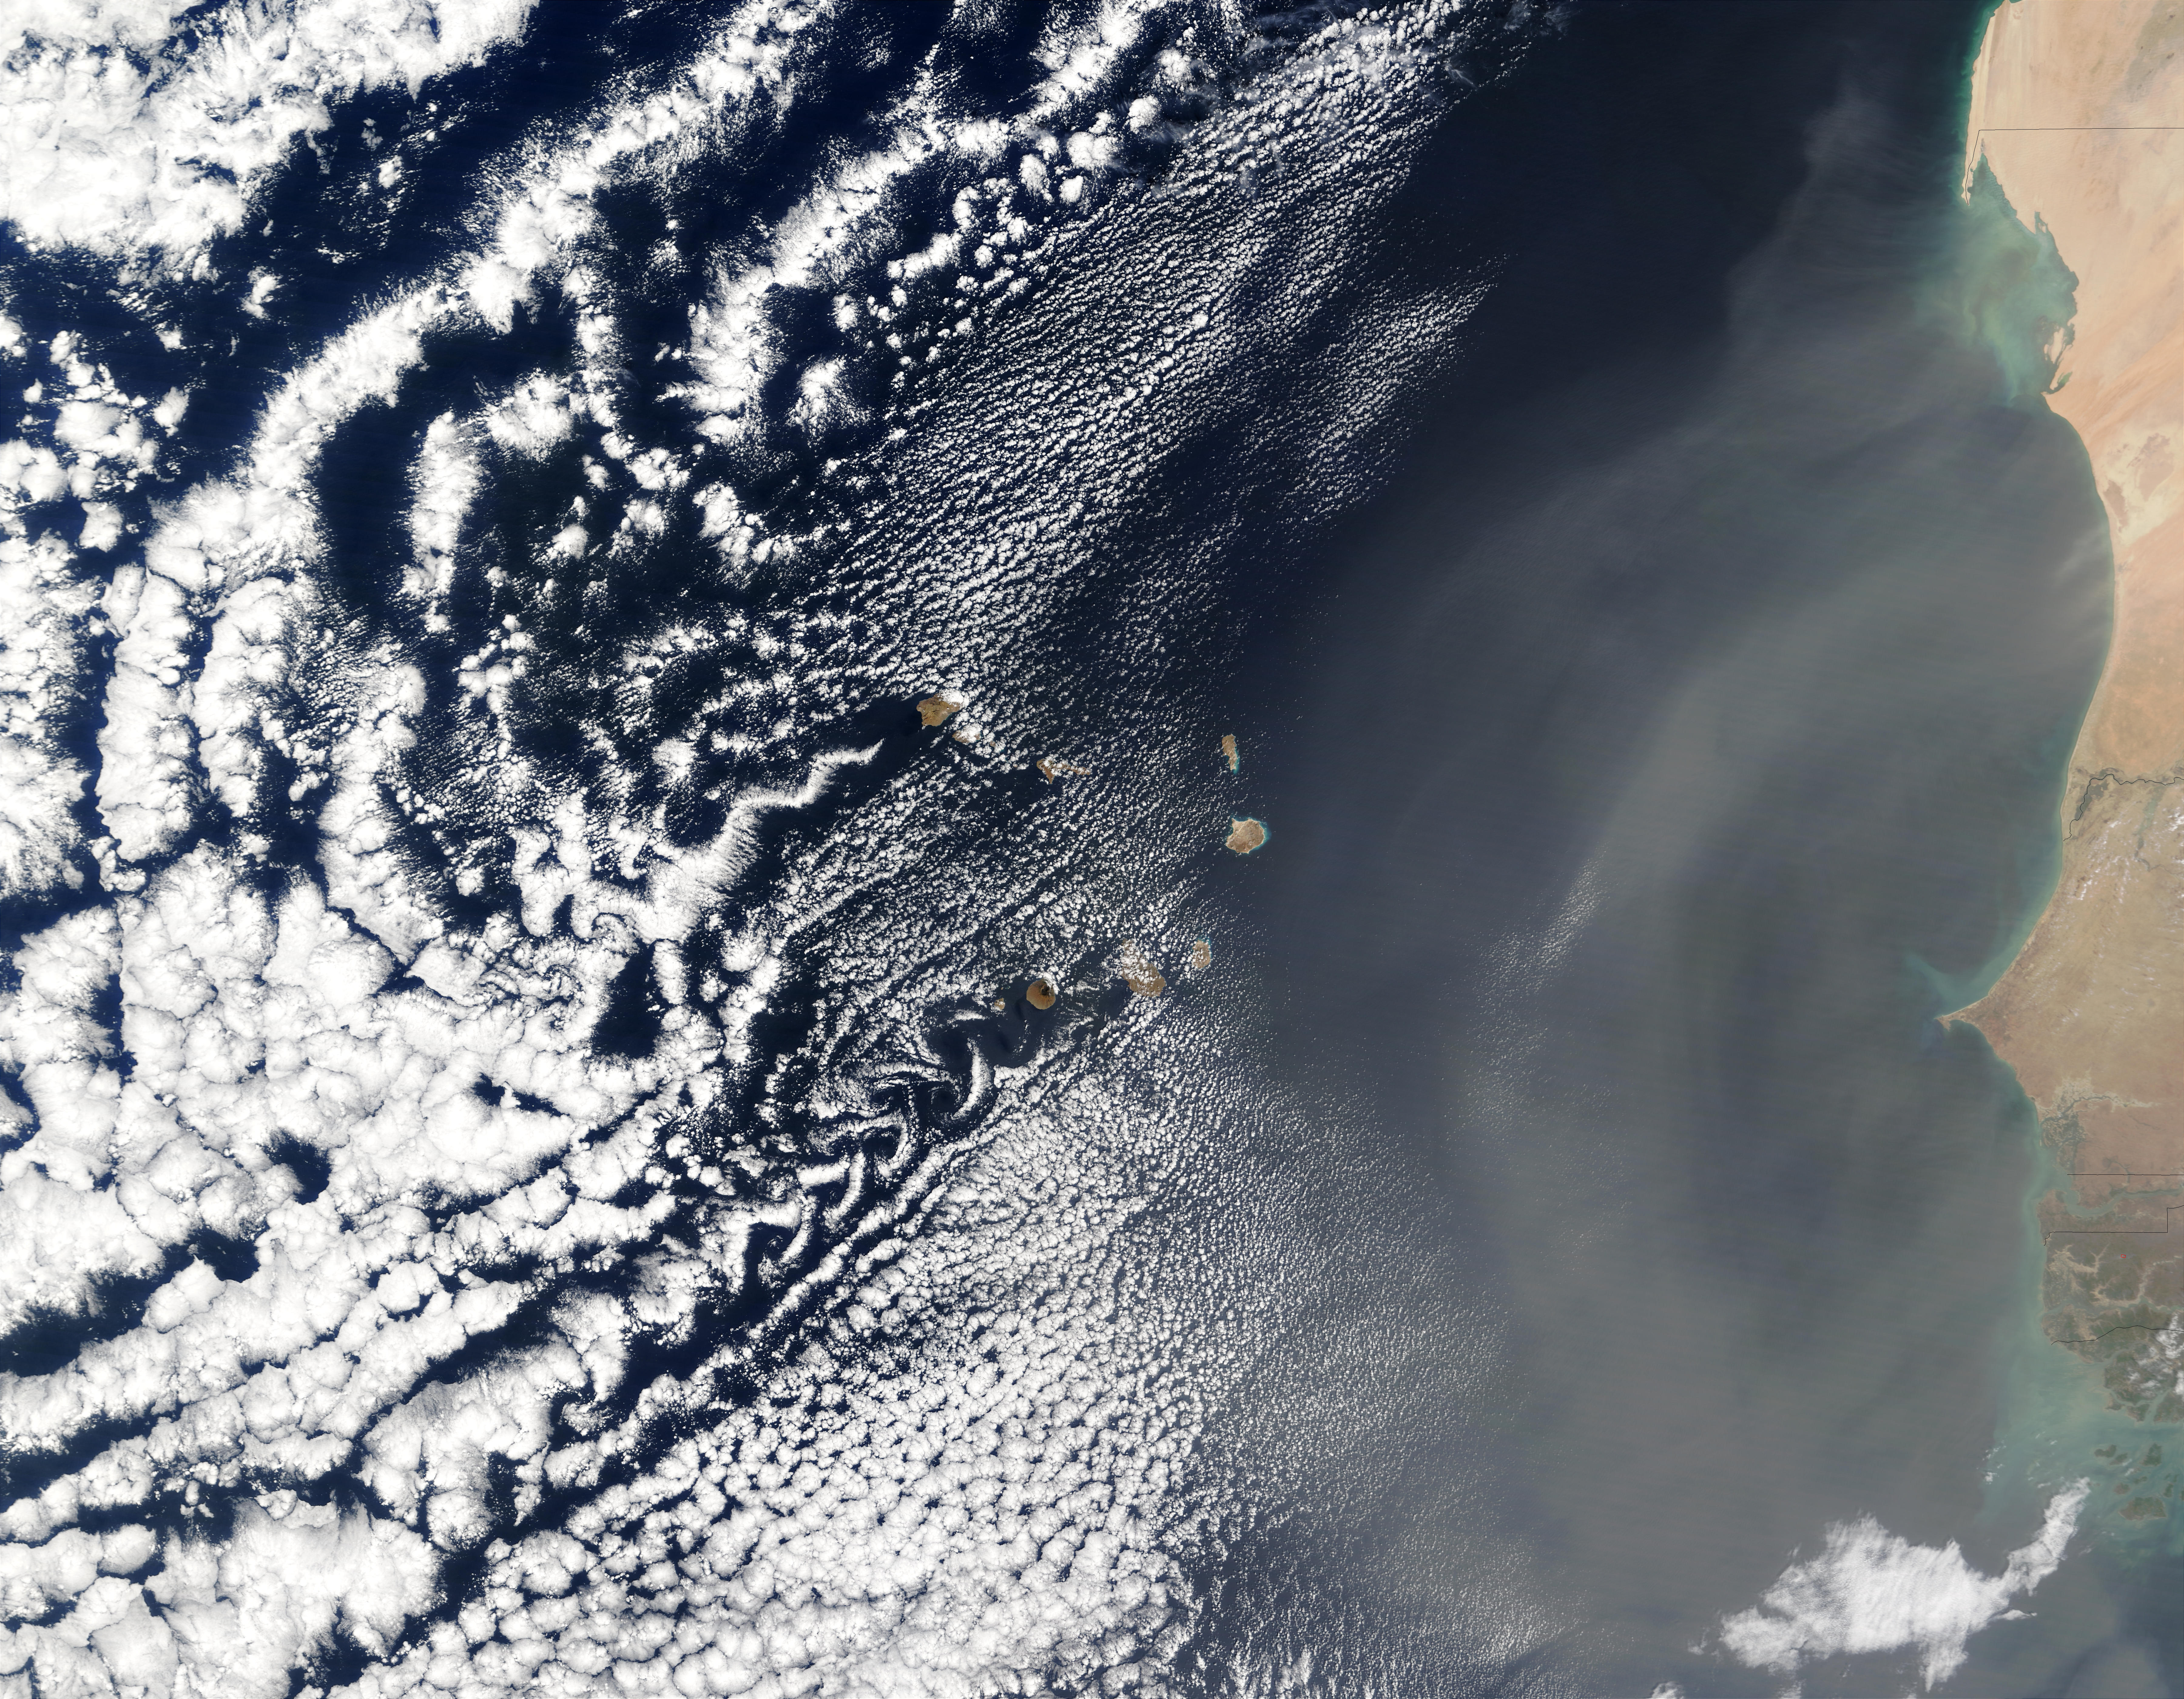 Vortex street and dust off Cape Verde Islands - related image preview